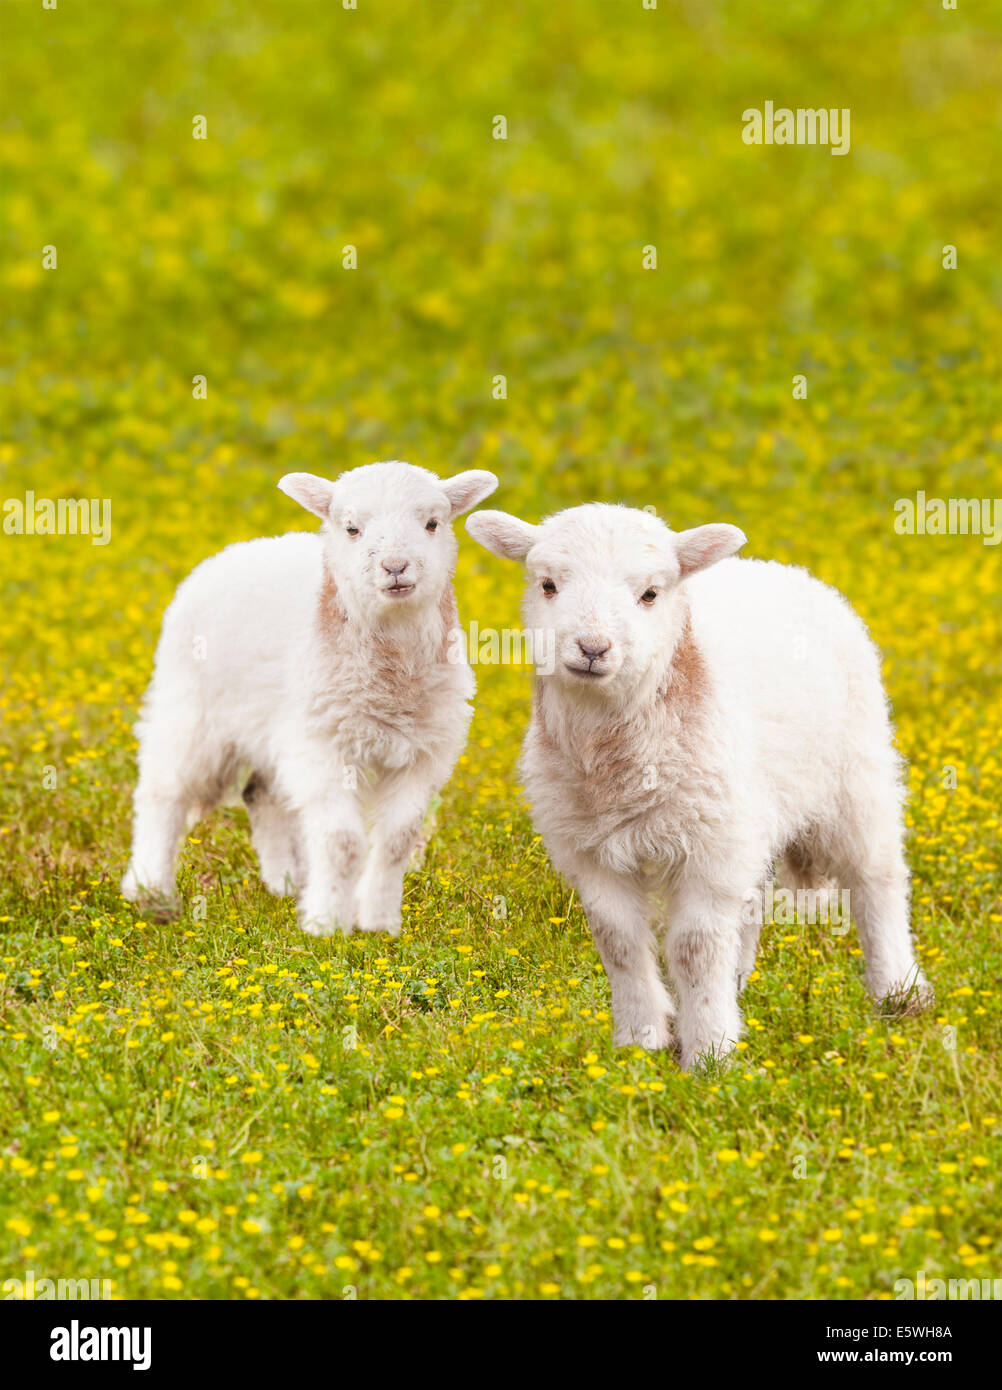 Pair of young baby lambs in a meadow full of wildflowers, UK Stock Photo